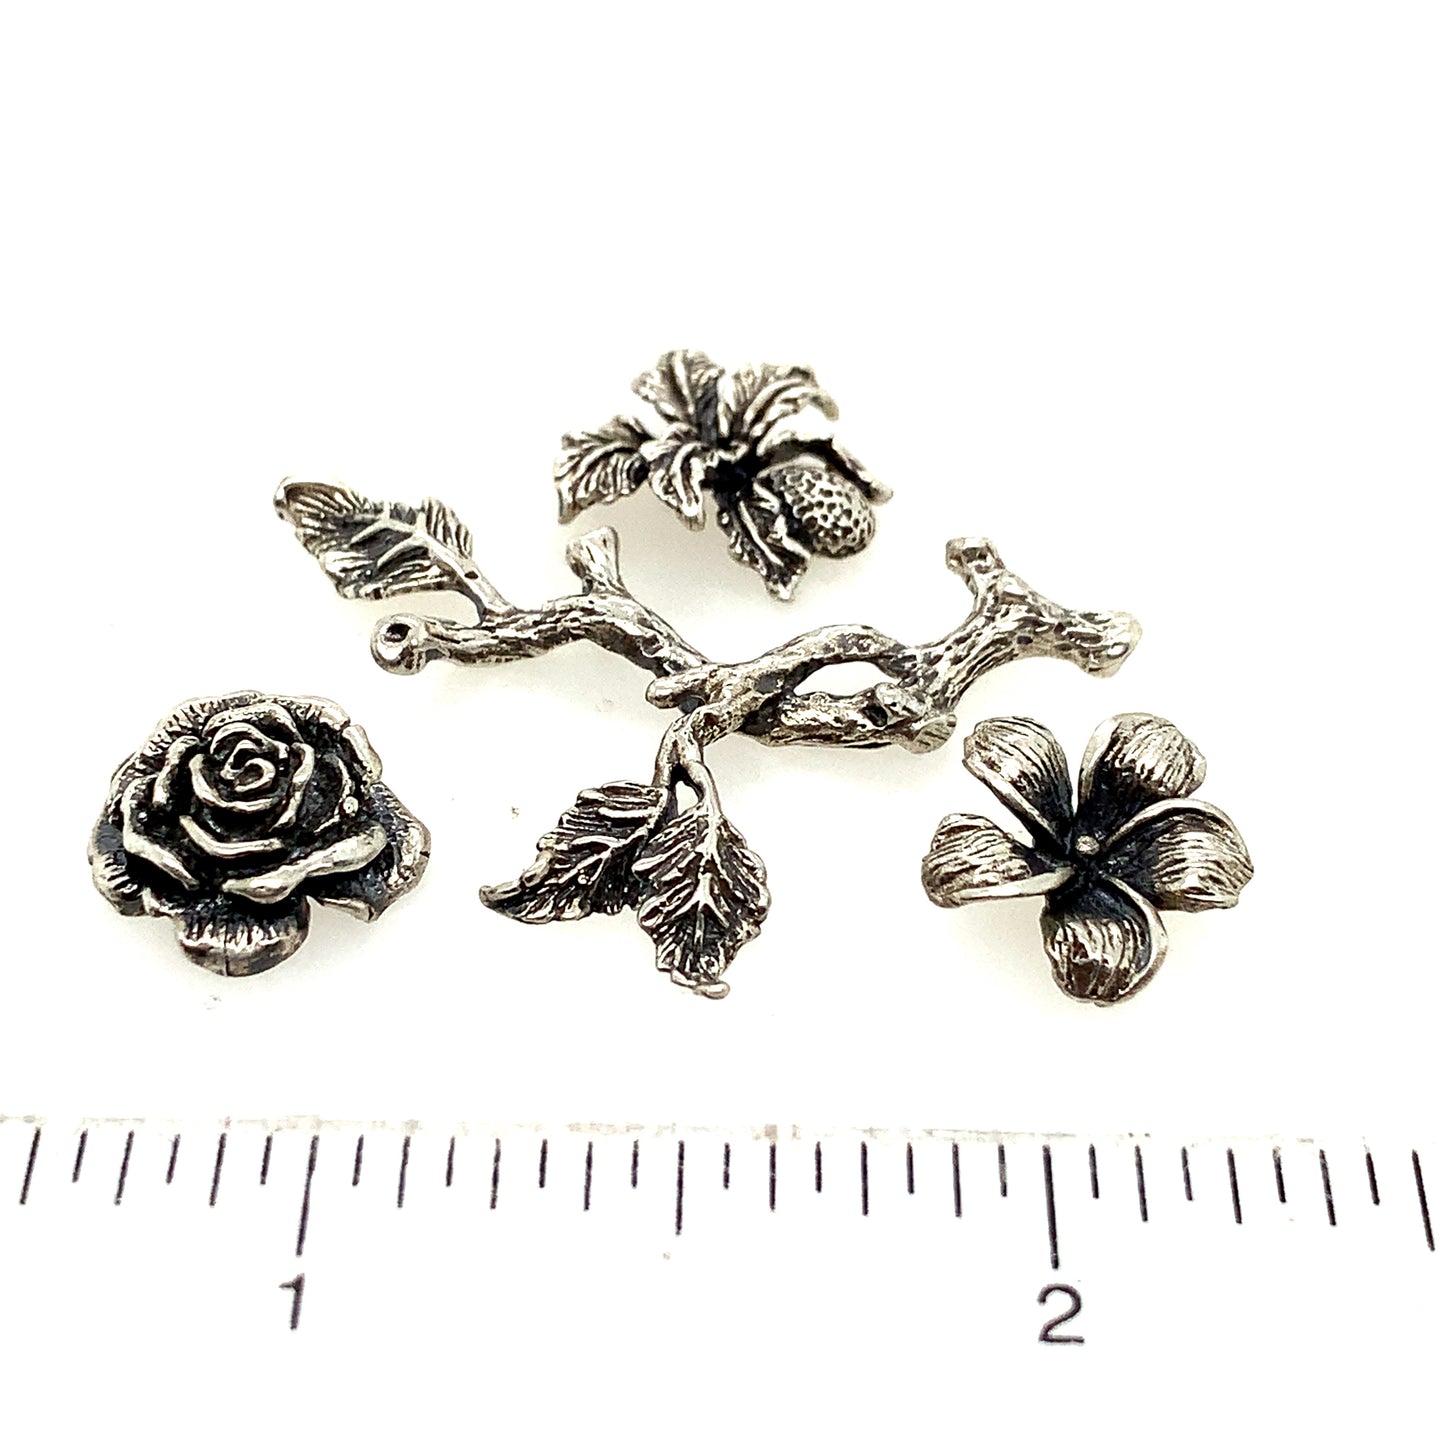 Components 323 - Handmade Sterling Silver Turkish Flowers